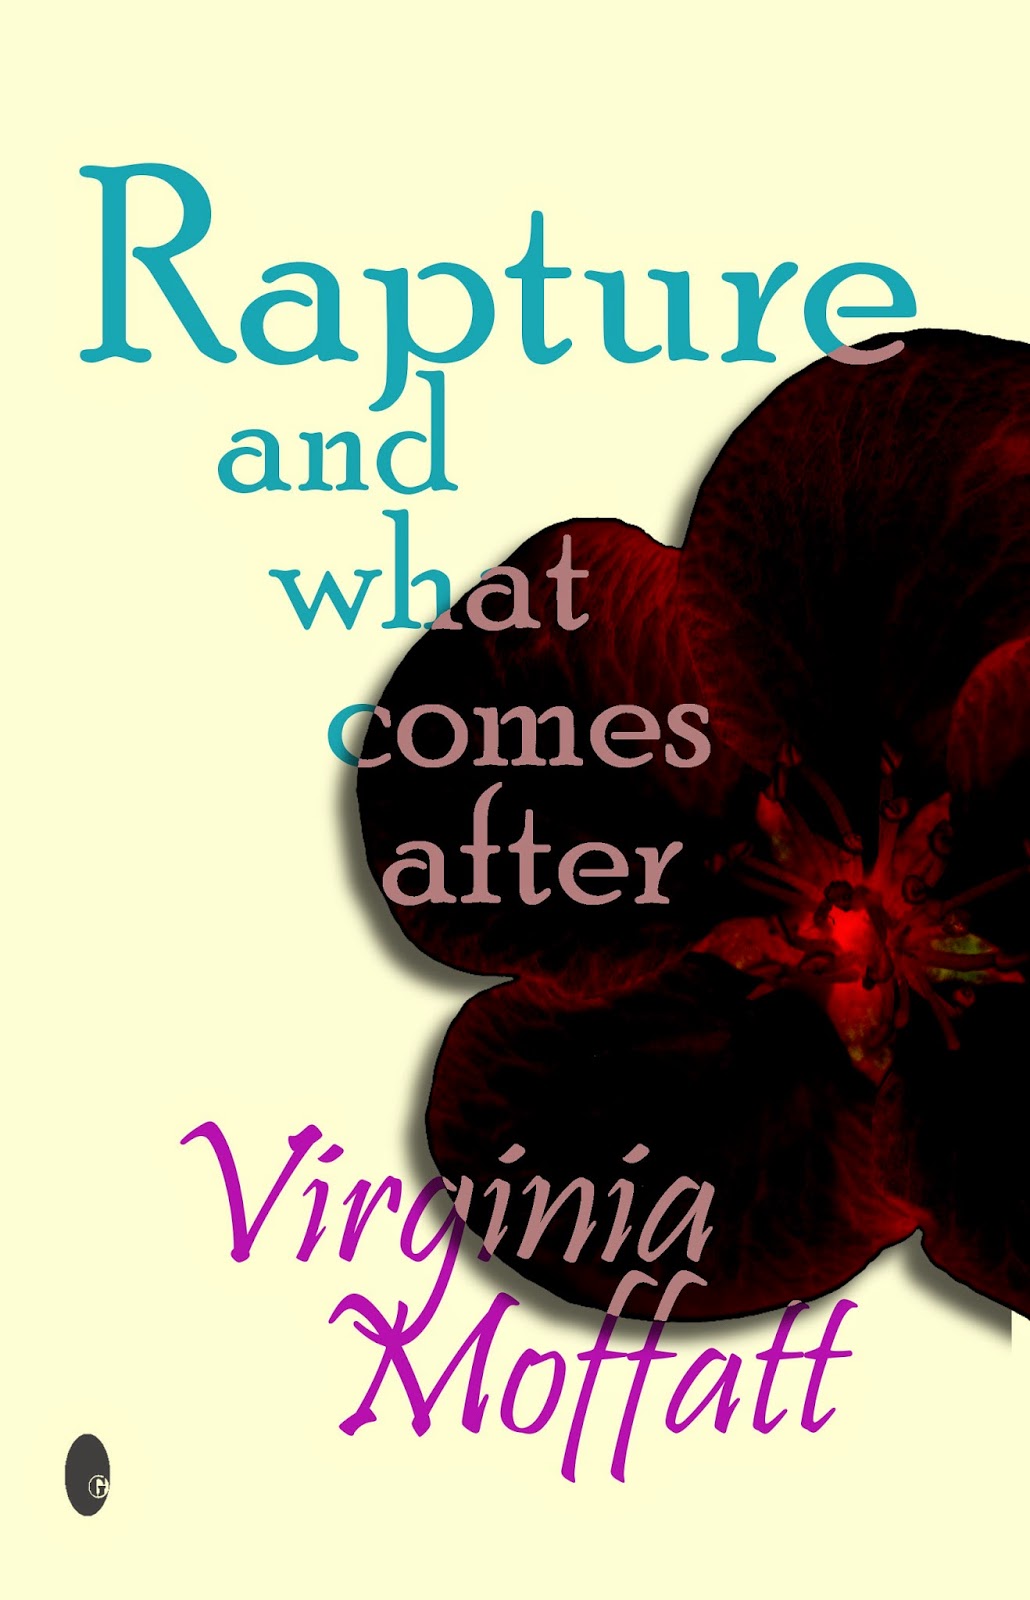 Rapture and what comes after by Virginia Moffatt